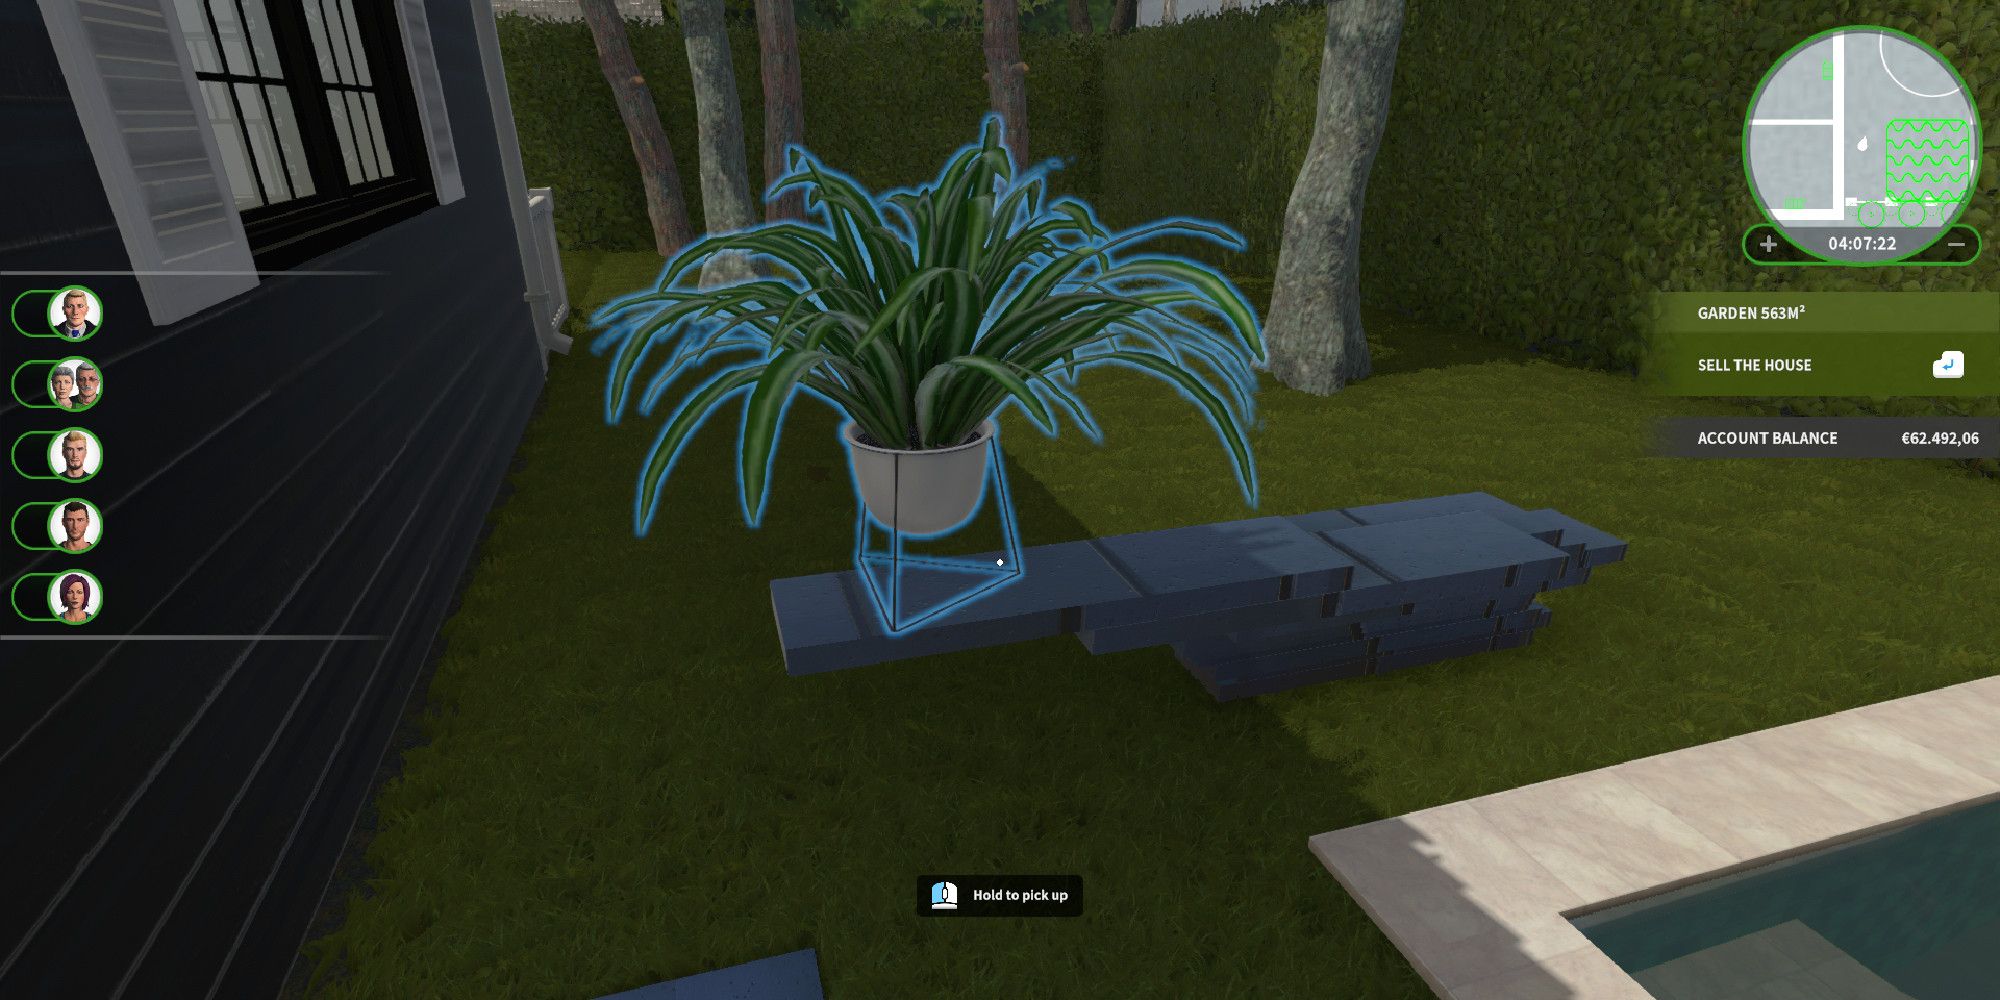 House Flipper Using A Stack Of Paving Stones To Make A Plant Taller